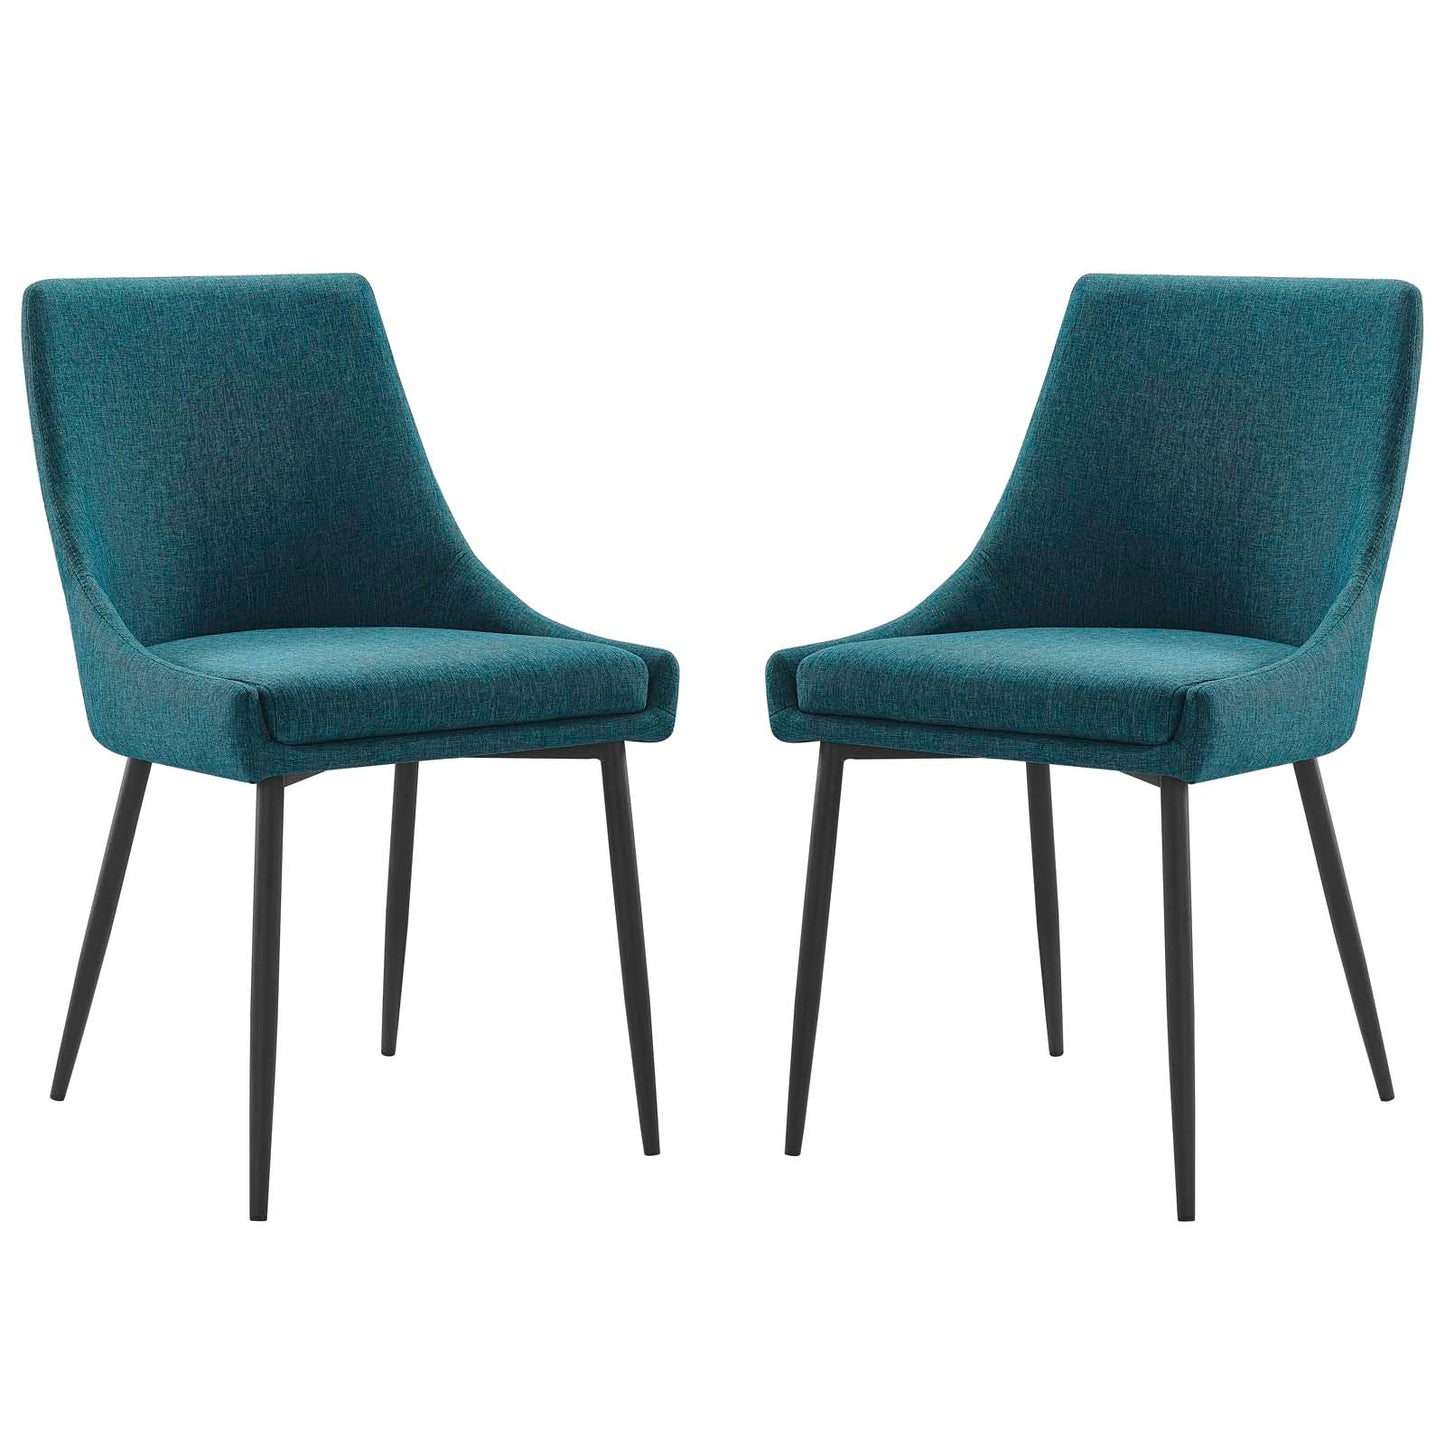 Viscount Upholstered Fabric Dining Chairs - Set of 2 Black Teal EEI-3809-BLK-TEA